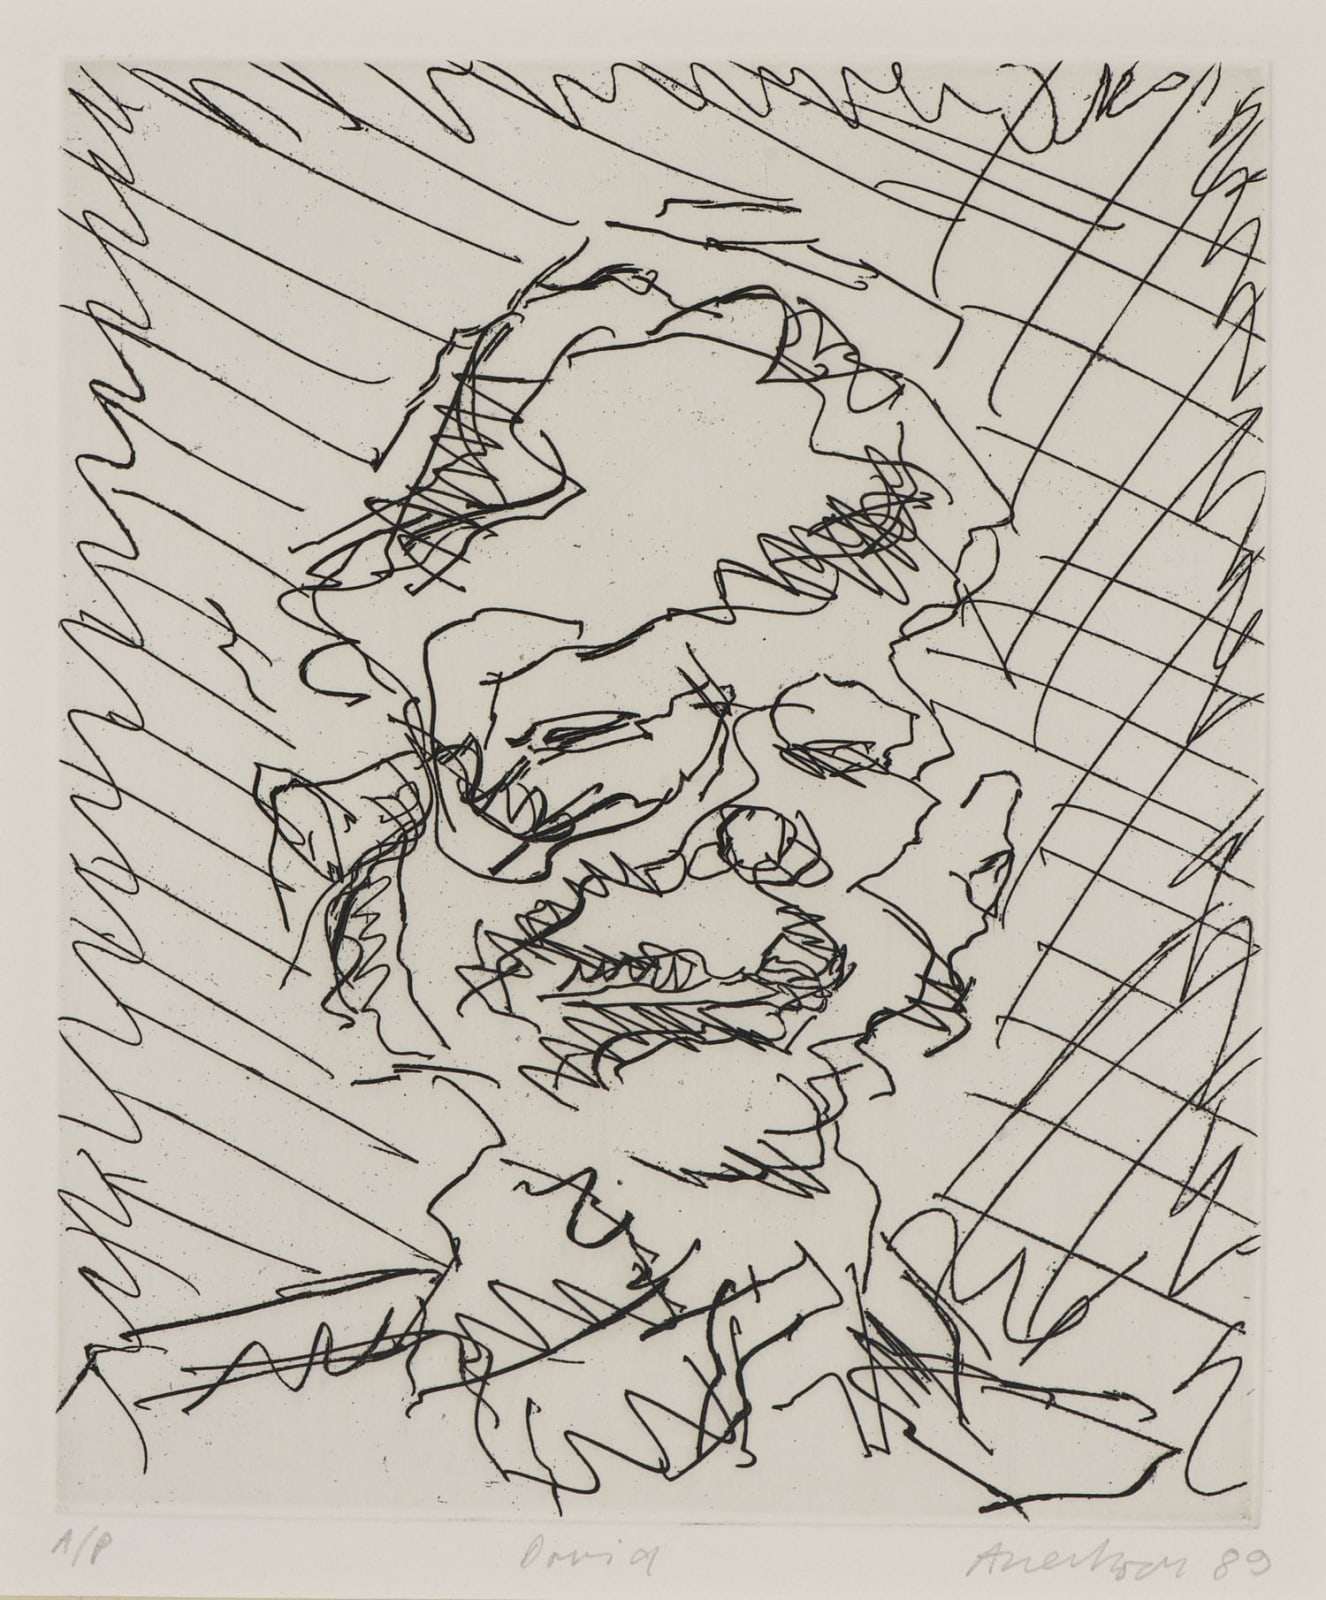 Frank Auerbach (1931-) David, Series: Part of Seven Portraits 1989 Etching, printed on Somerset white paper, artist's proof outside the published edition of 50 19.3 x 16.3 cm Ben Uri Collection © Frank Auerbach, courtesy Marlborough Fine Art